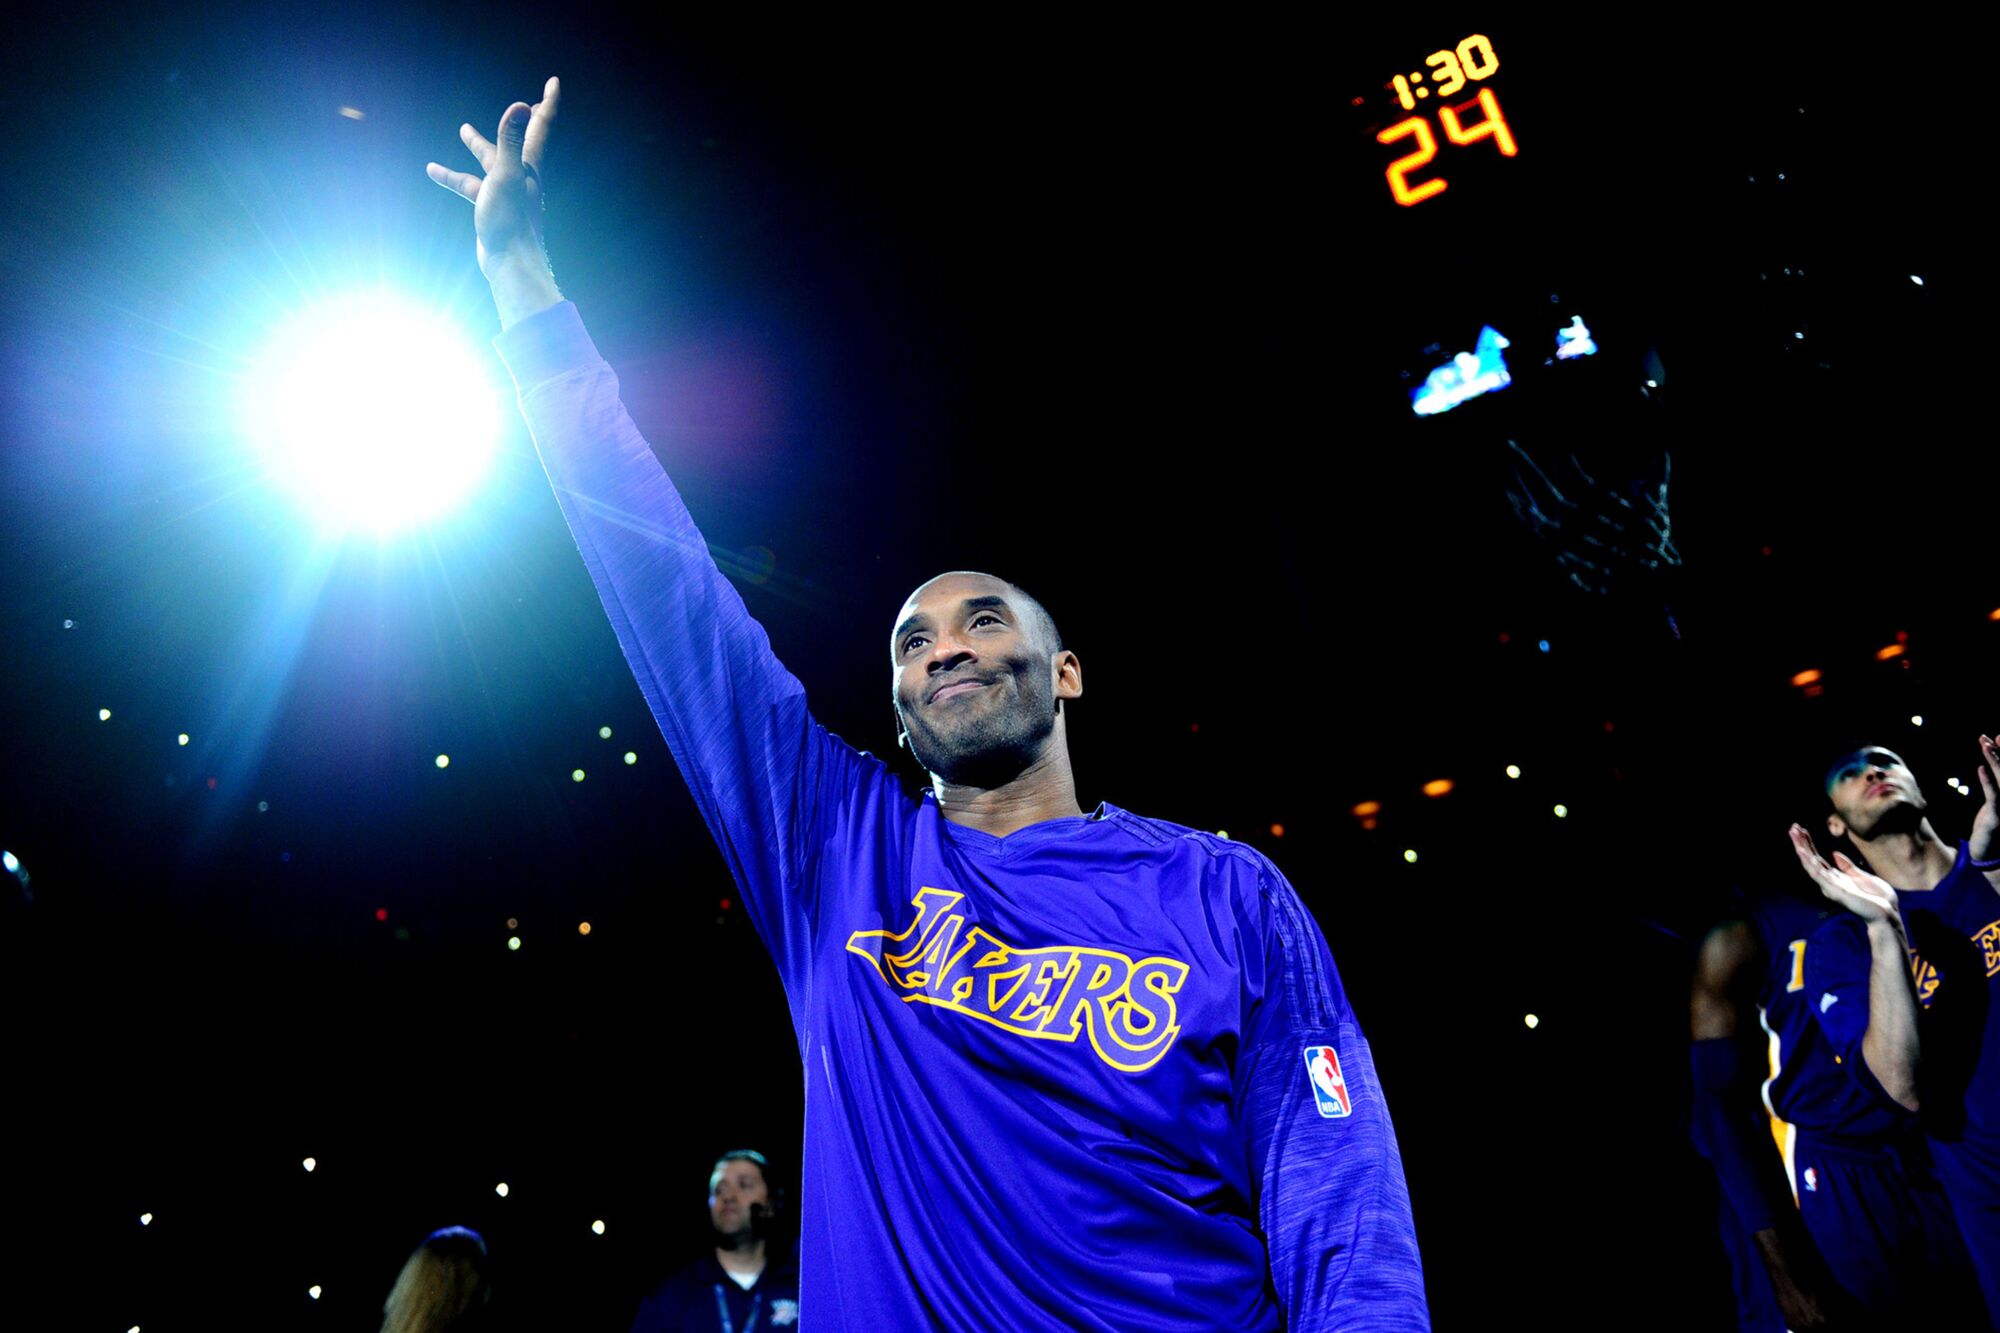 Kobe Bryant waves to the crowd as he is introduced before a game.